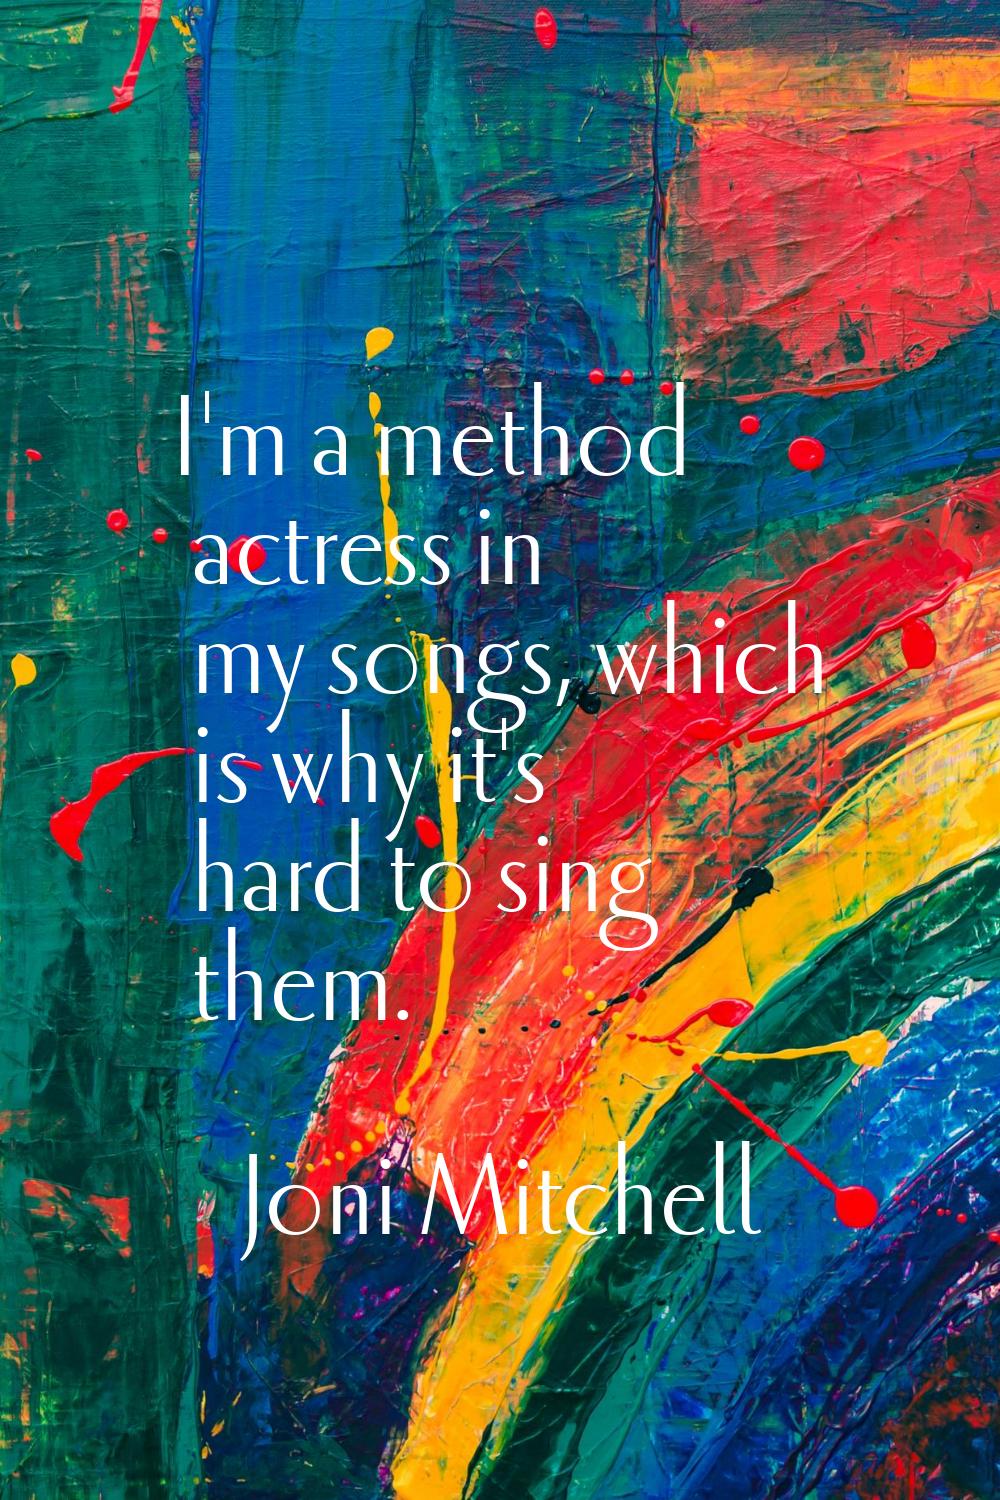 I'm a method actress in my songs, which is why it's hard to sing them.